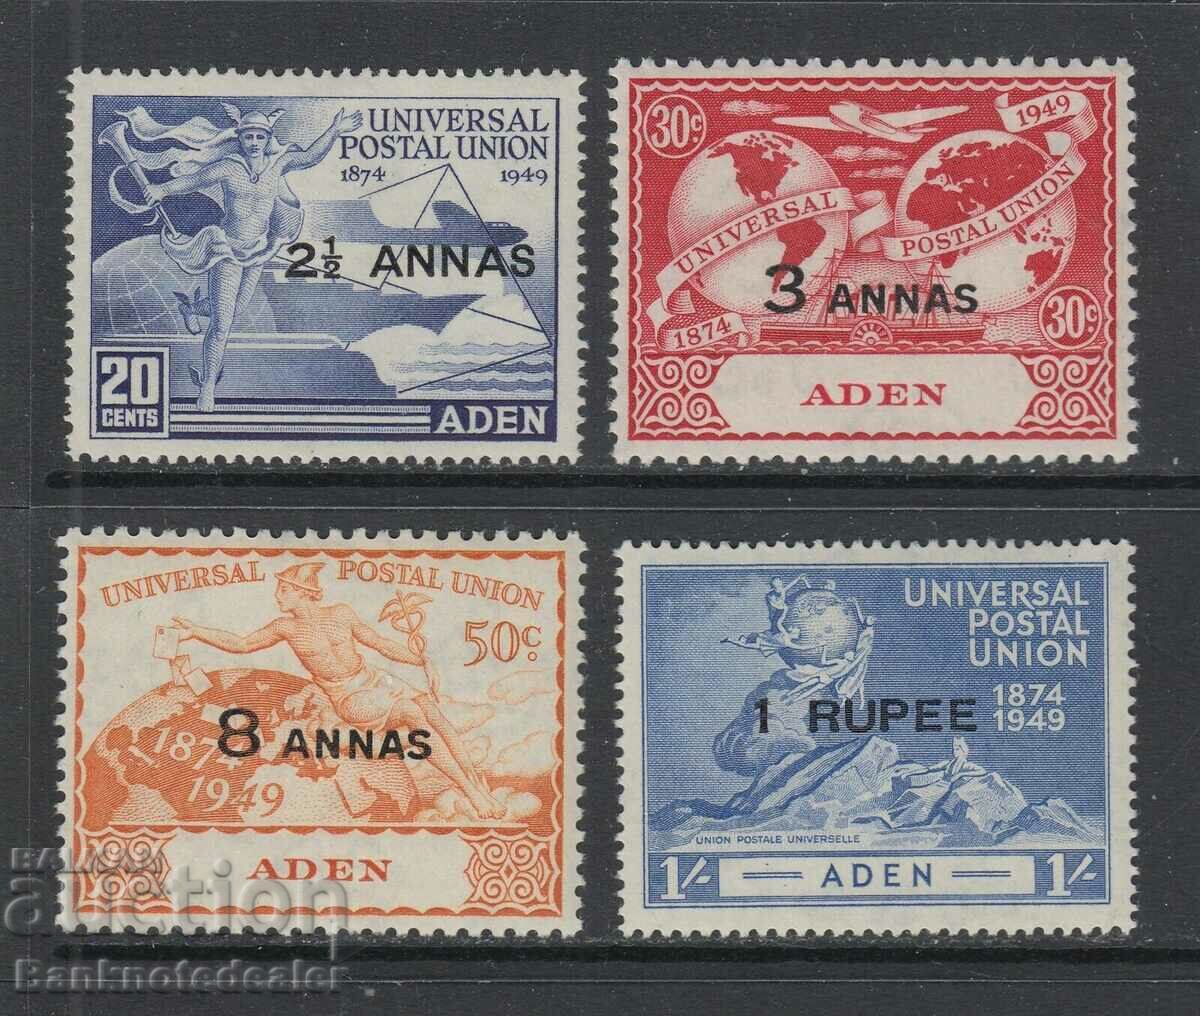 Aden 1949 UPU Anniversary Set of 4 Stamps SG32-35 MH